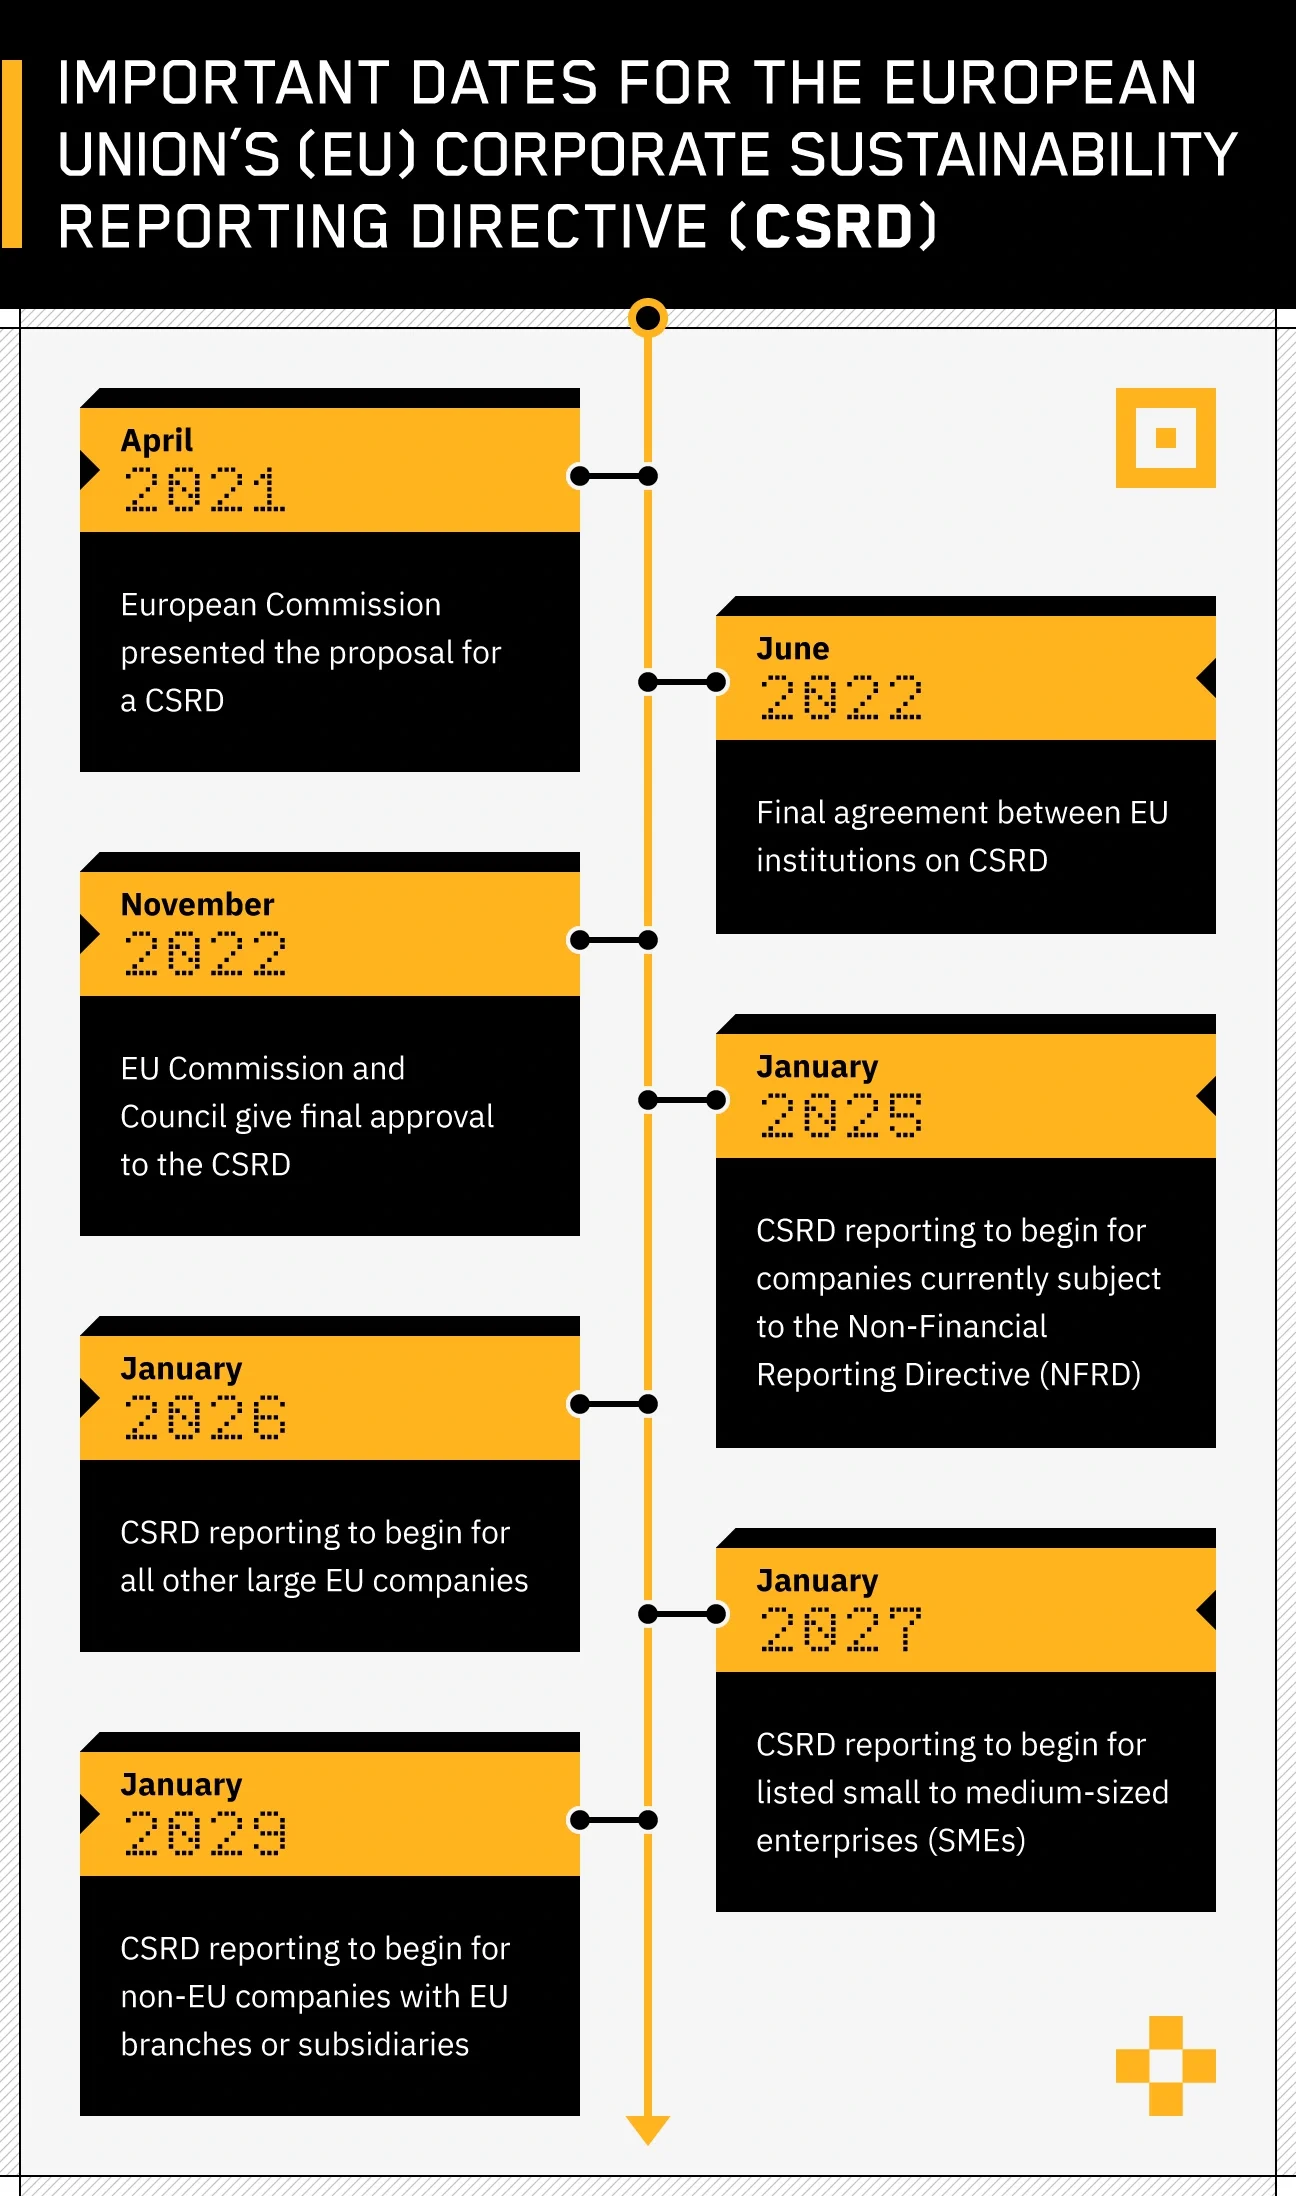 illustration of important dates related to the European Union’s Corporate Sustainability Reporting Directive (CSRD)